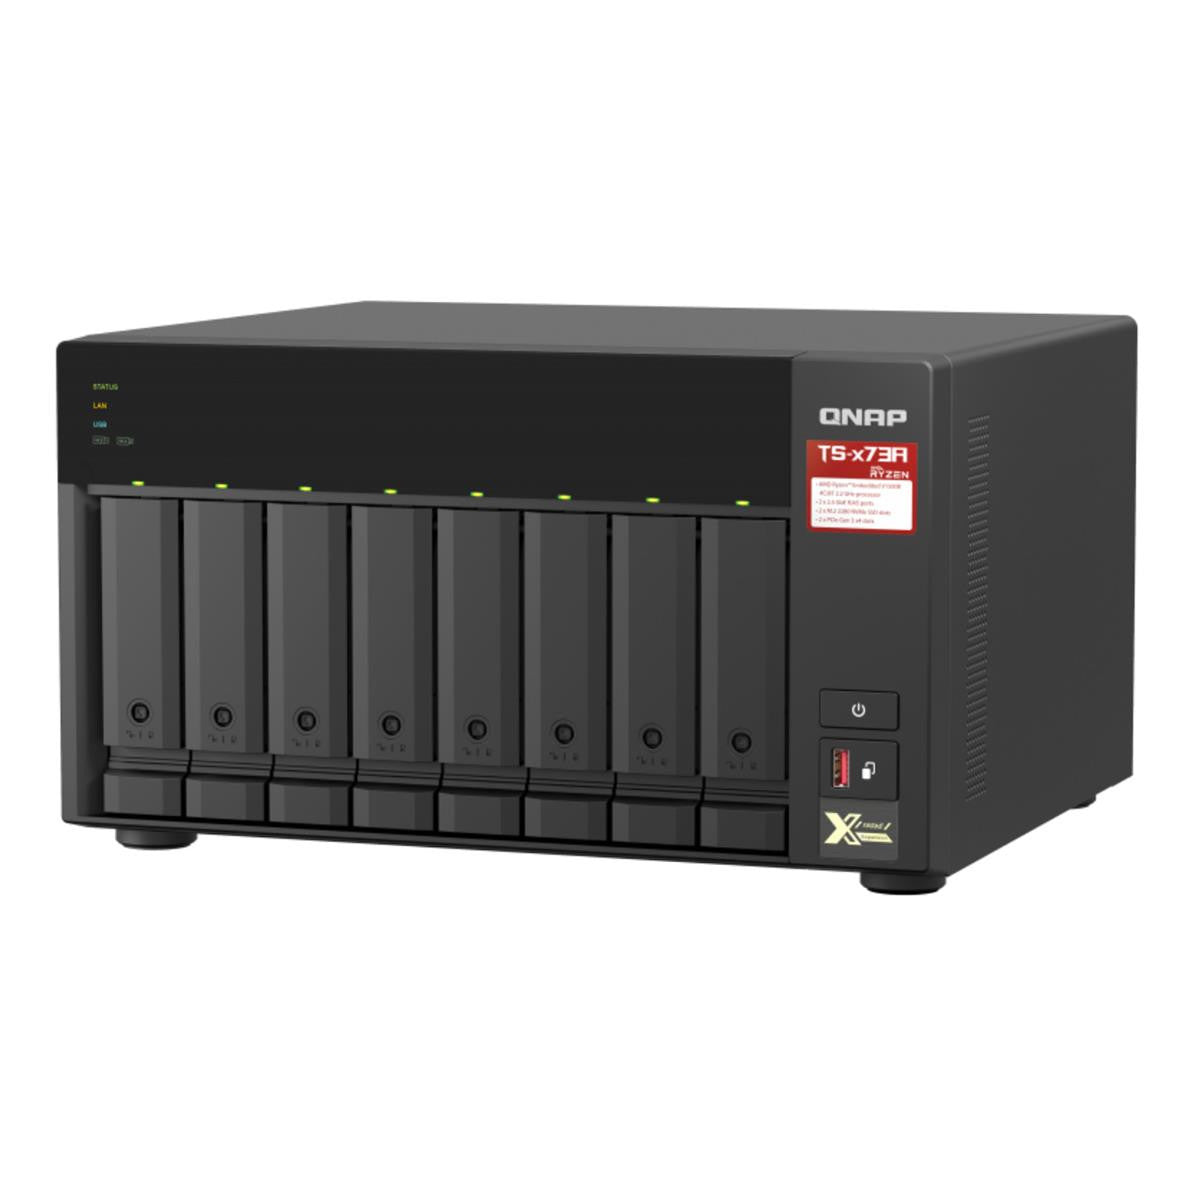 QNAP TS-873A 8-BAY NAS with 64GB DDR4 RAM and 80TB (8x10TB) Seagate Ironwolf NAS Drives Fully Assembled and Tested